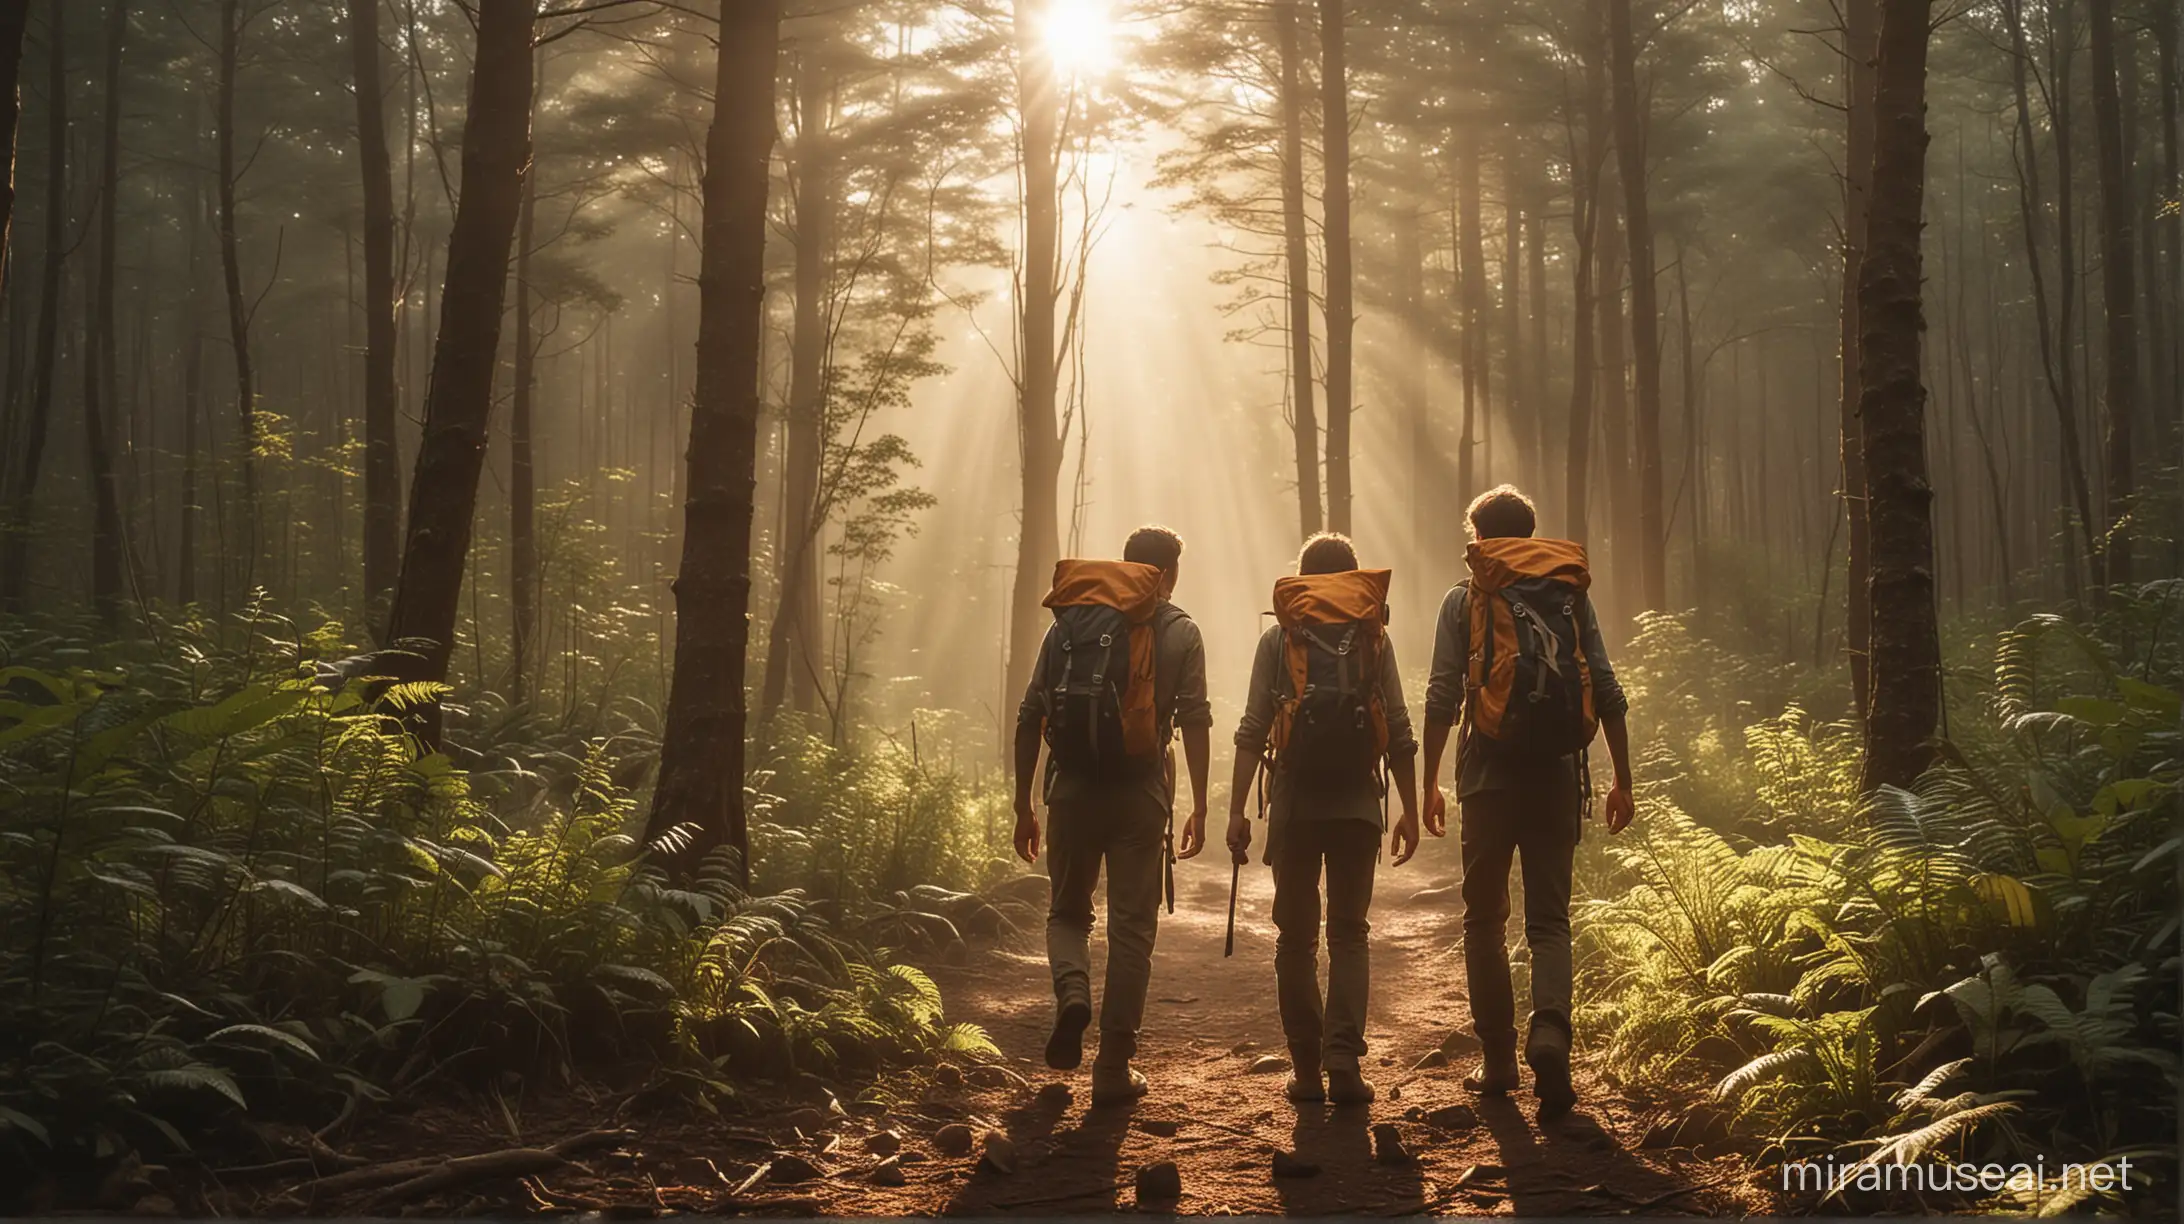 Excited Friends Embark on Adventure into Dense Forest